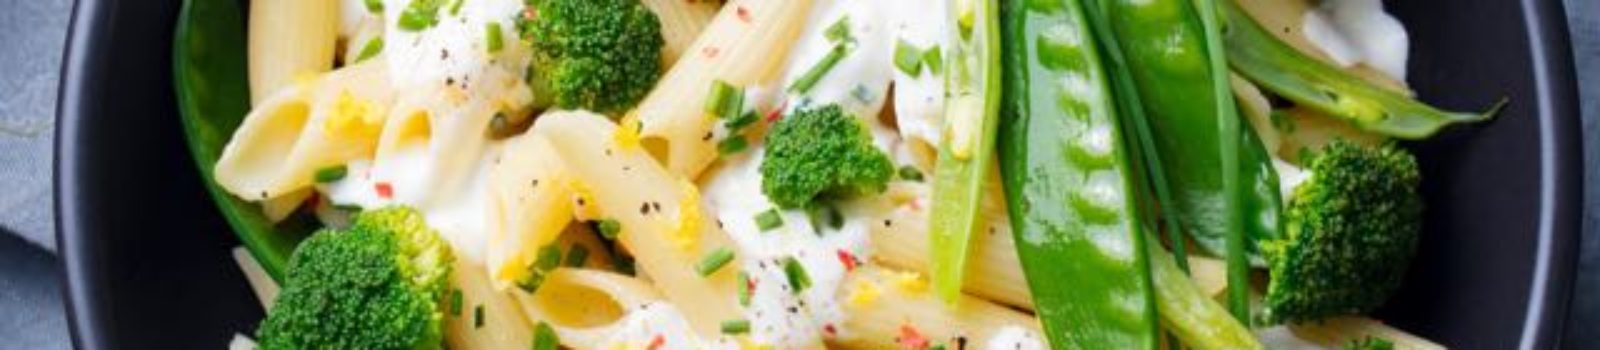 Pasta with white sauce and broccoli